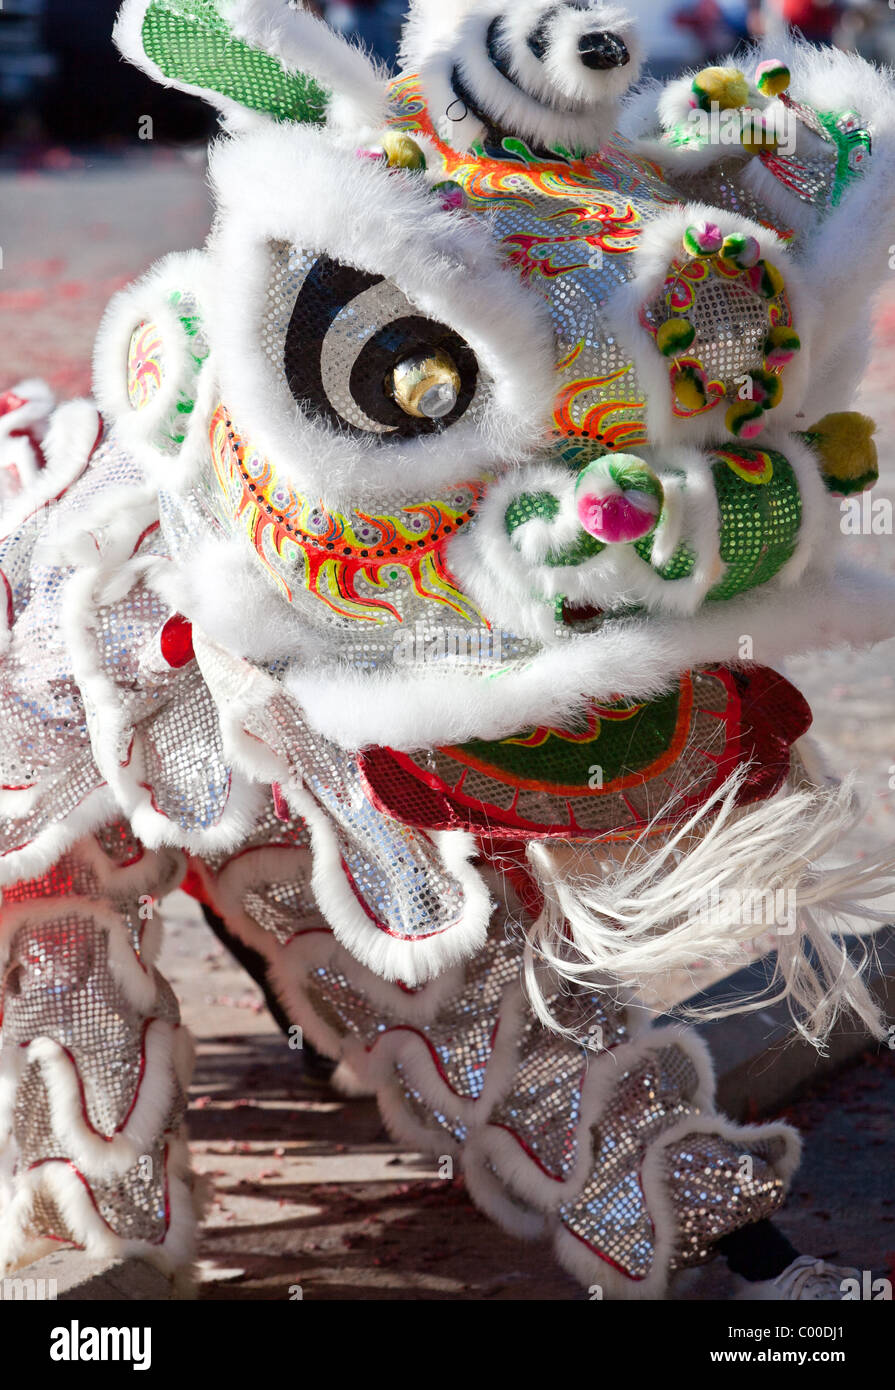 Chinese Lion Dancers perform in elaborate Lion costumes during Chinese New Year Celebrations Stock Photo